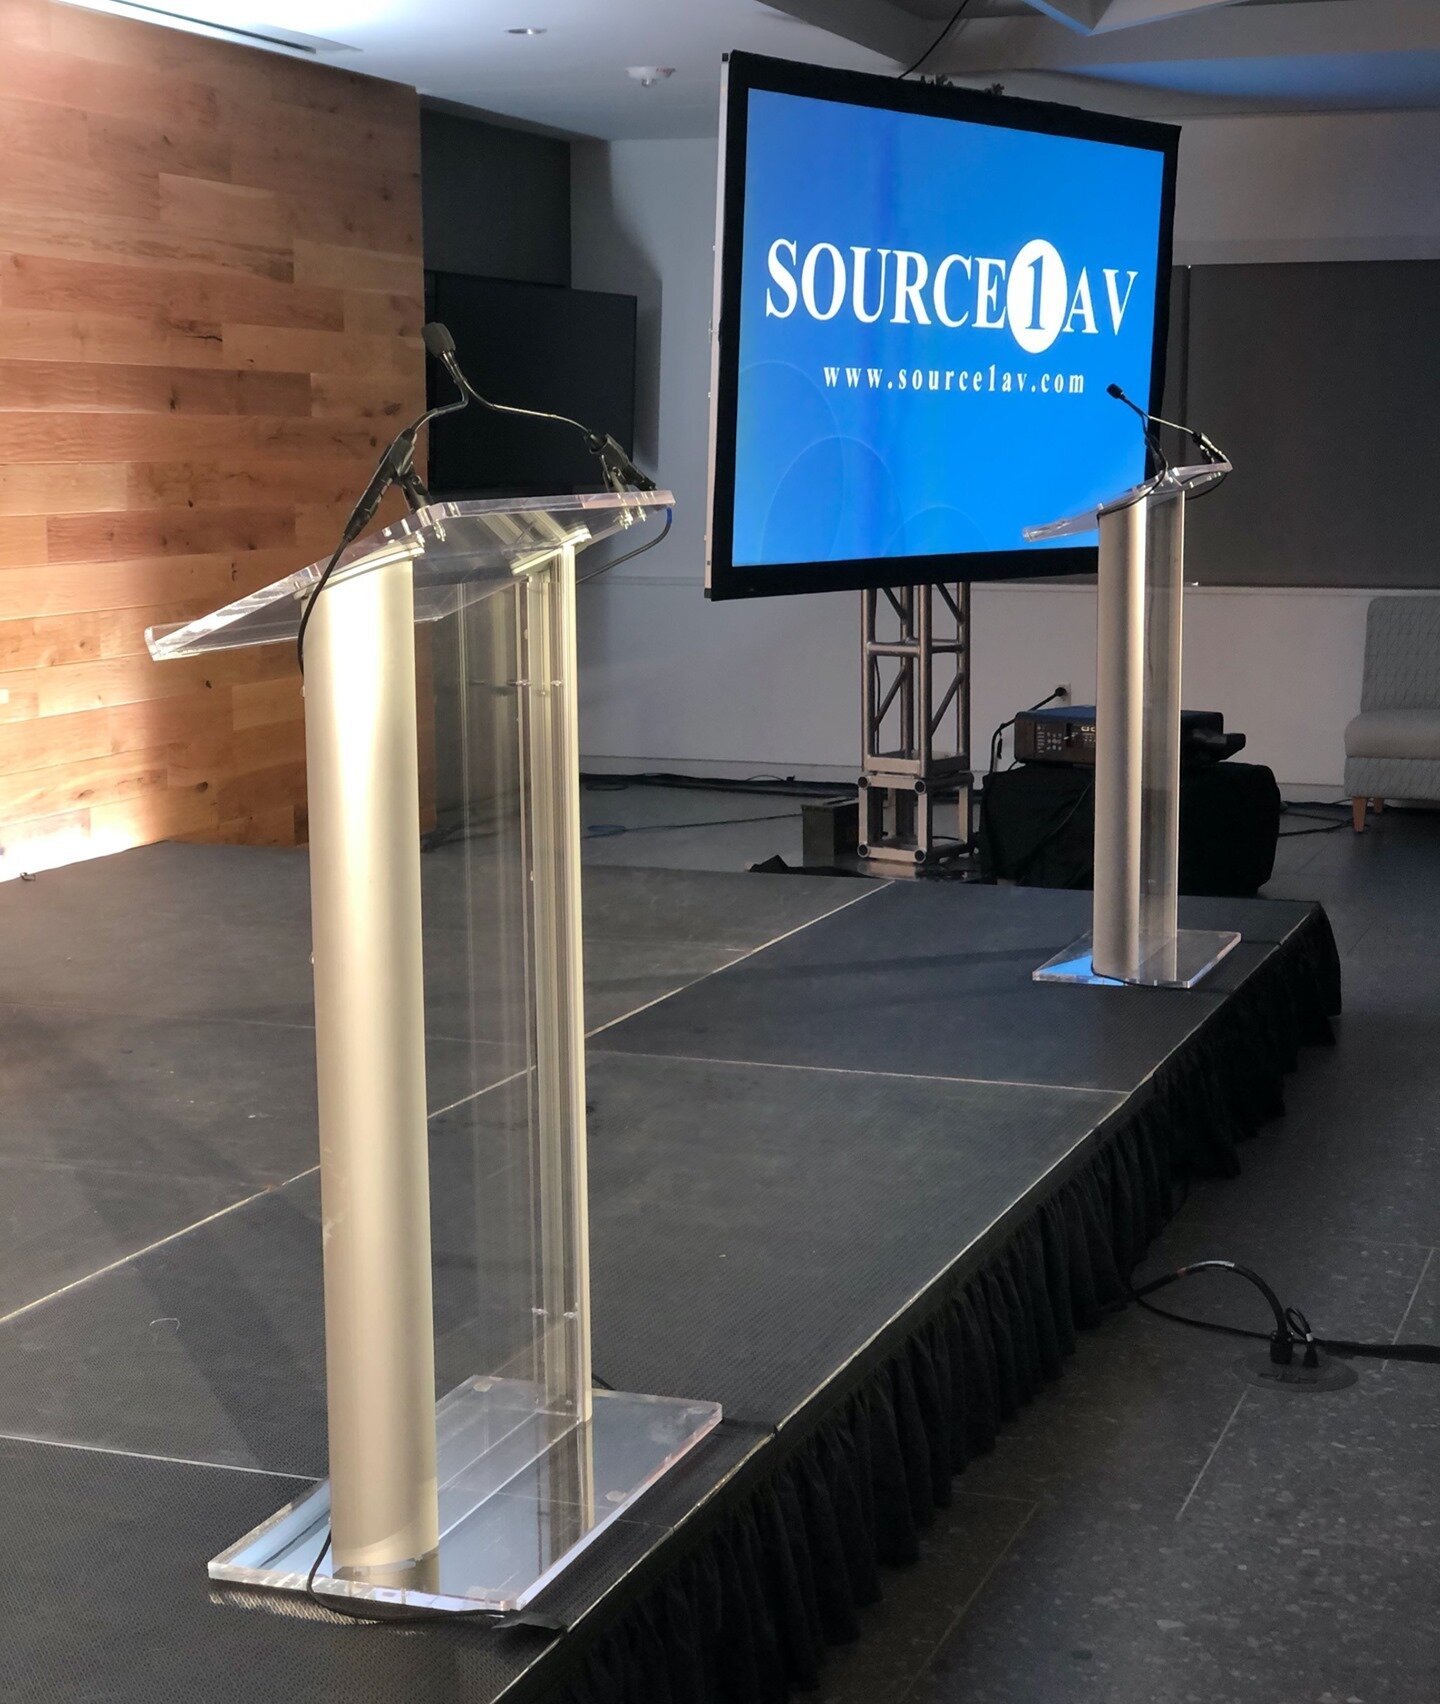 Keeping our social distance protocols in place for this hybrid event with matching podiums.
Ask me how we can support your virtual event with recording, hosting, moderation and content support. 
We are flexible, adaptable and have an outstanding crew